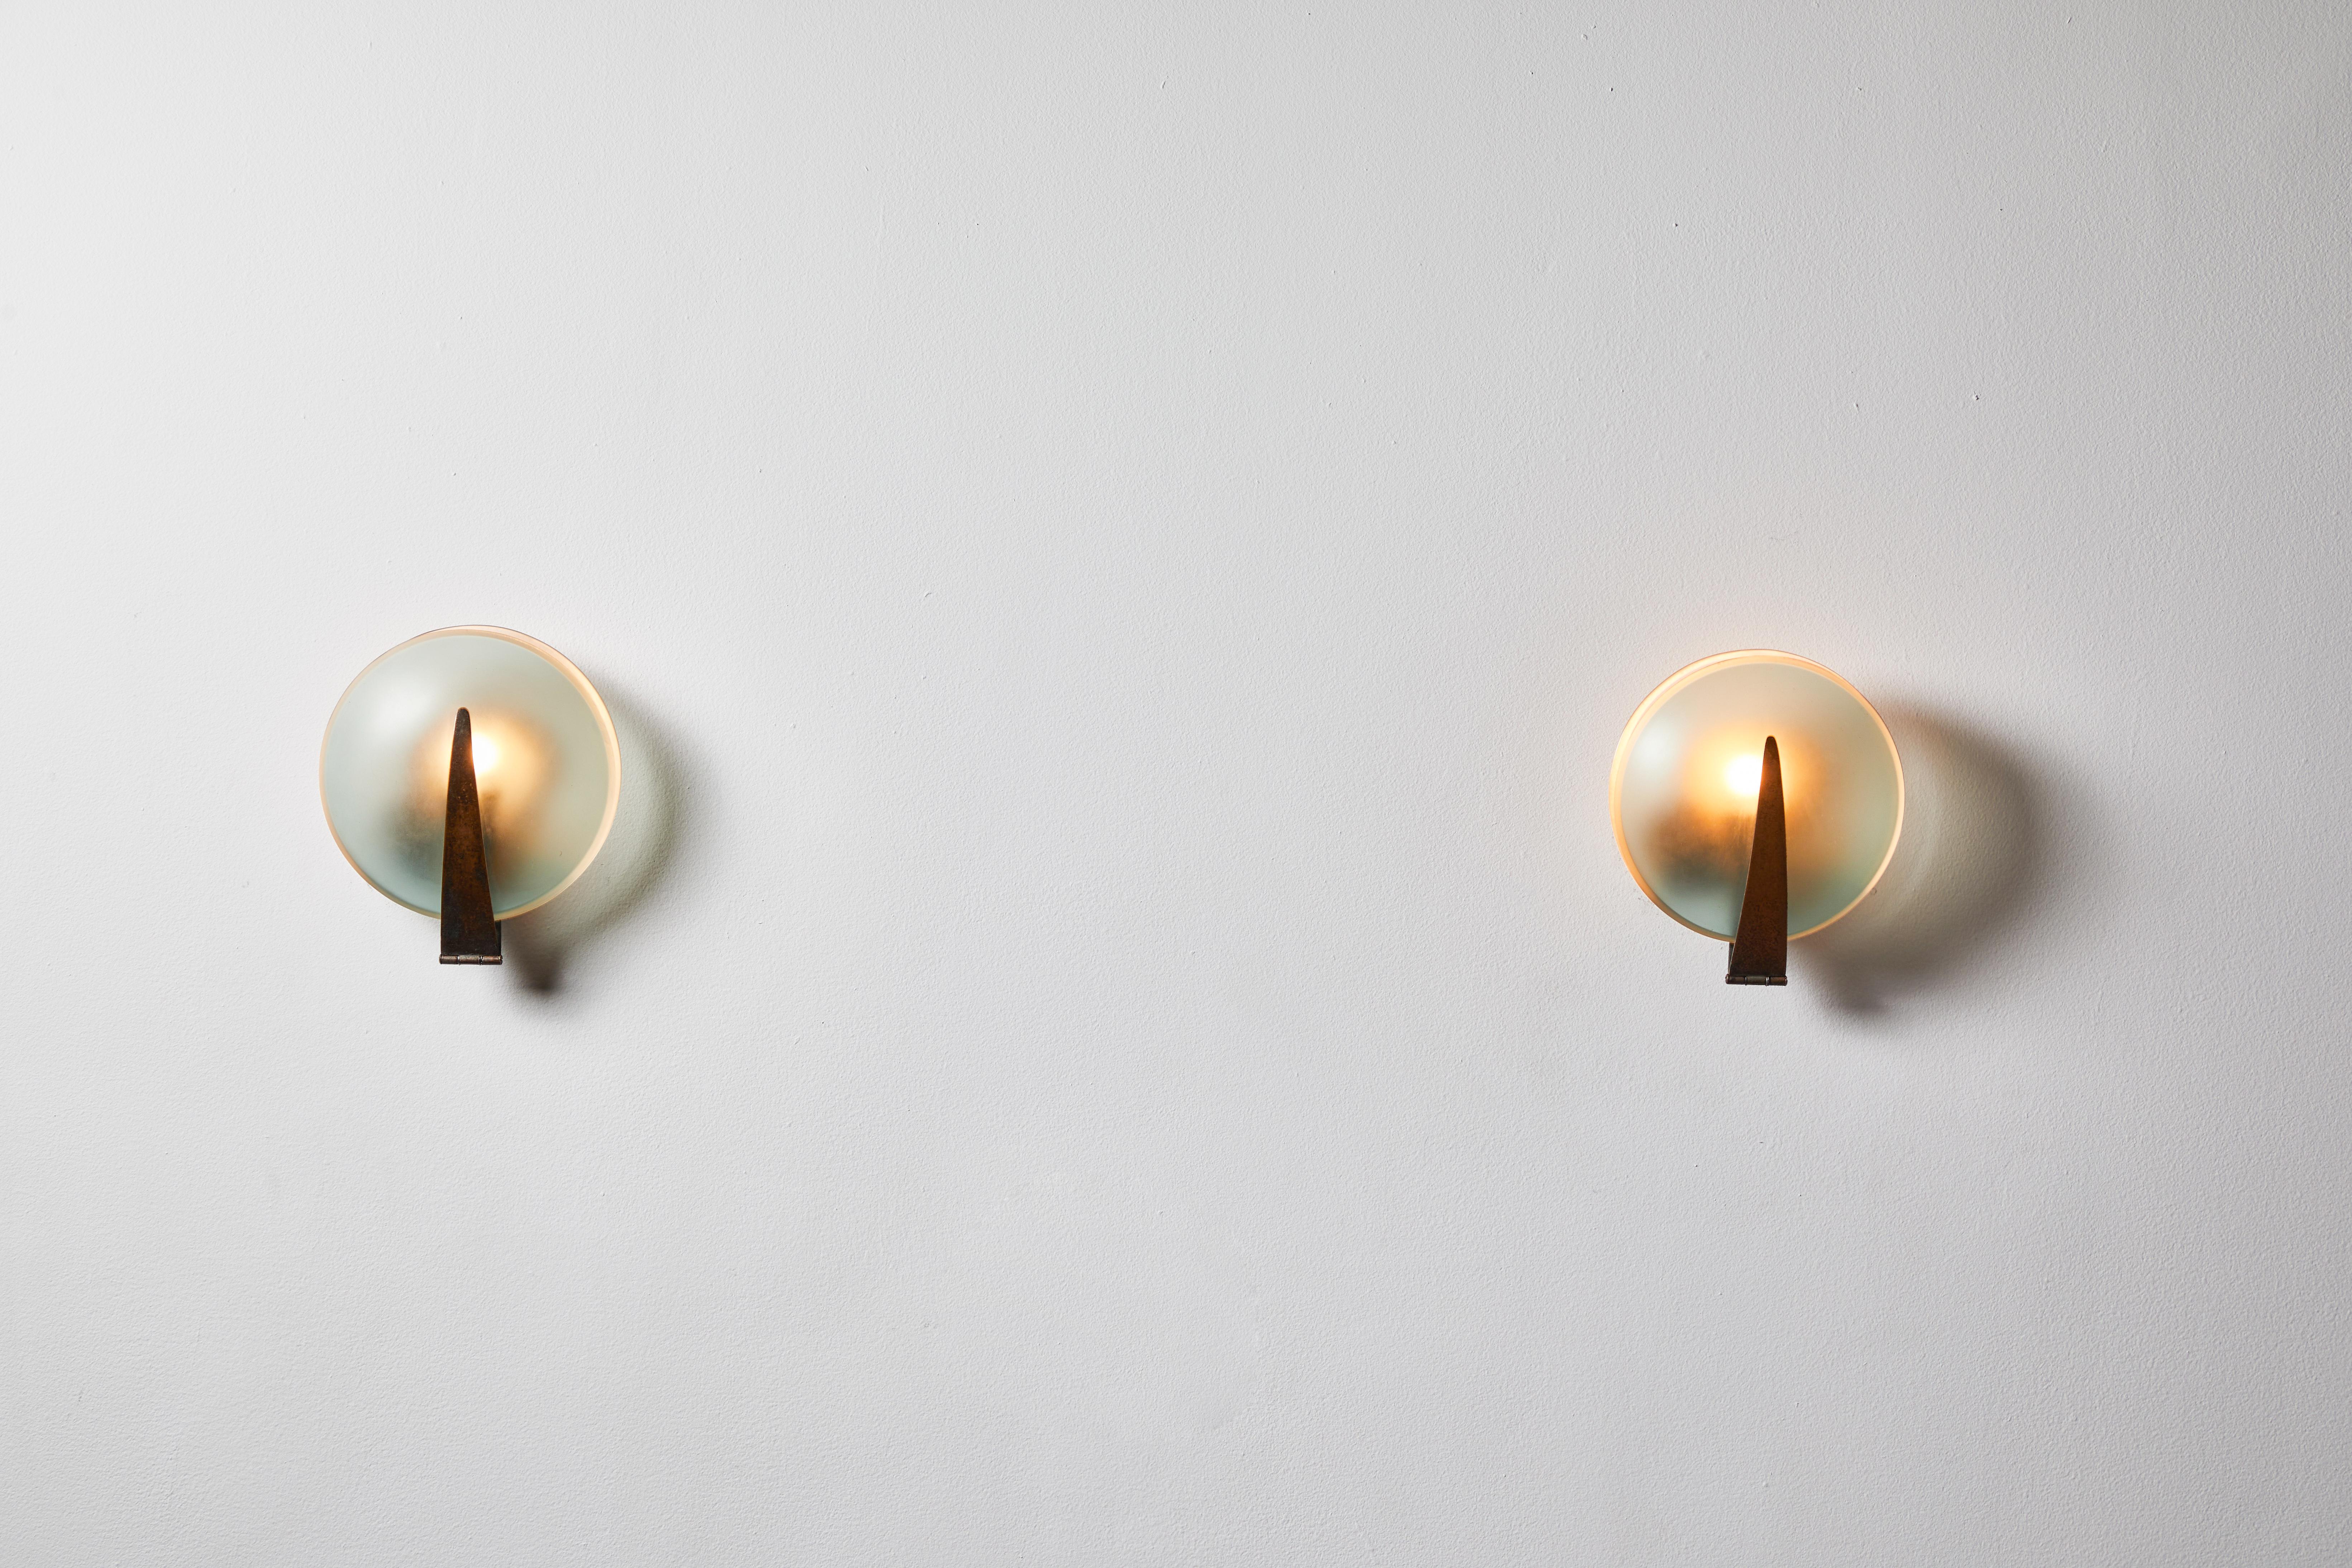 Mid-Century Modern Rare Pair of Sconces by Max Ingrand for Fontana Arte